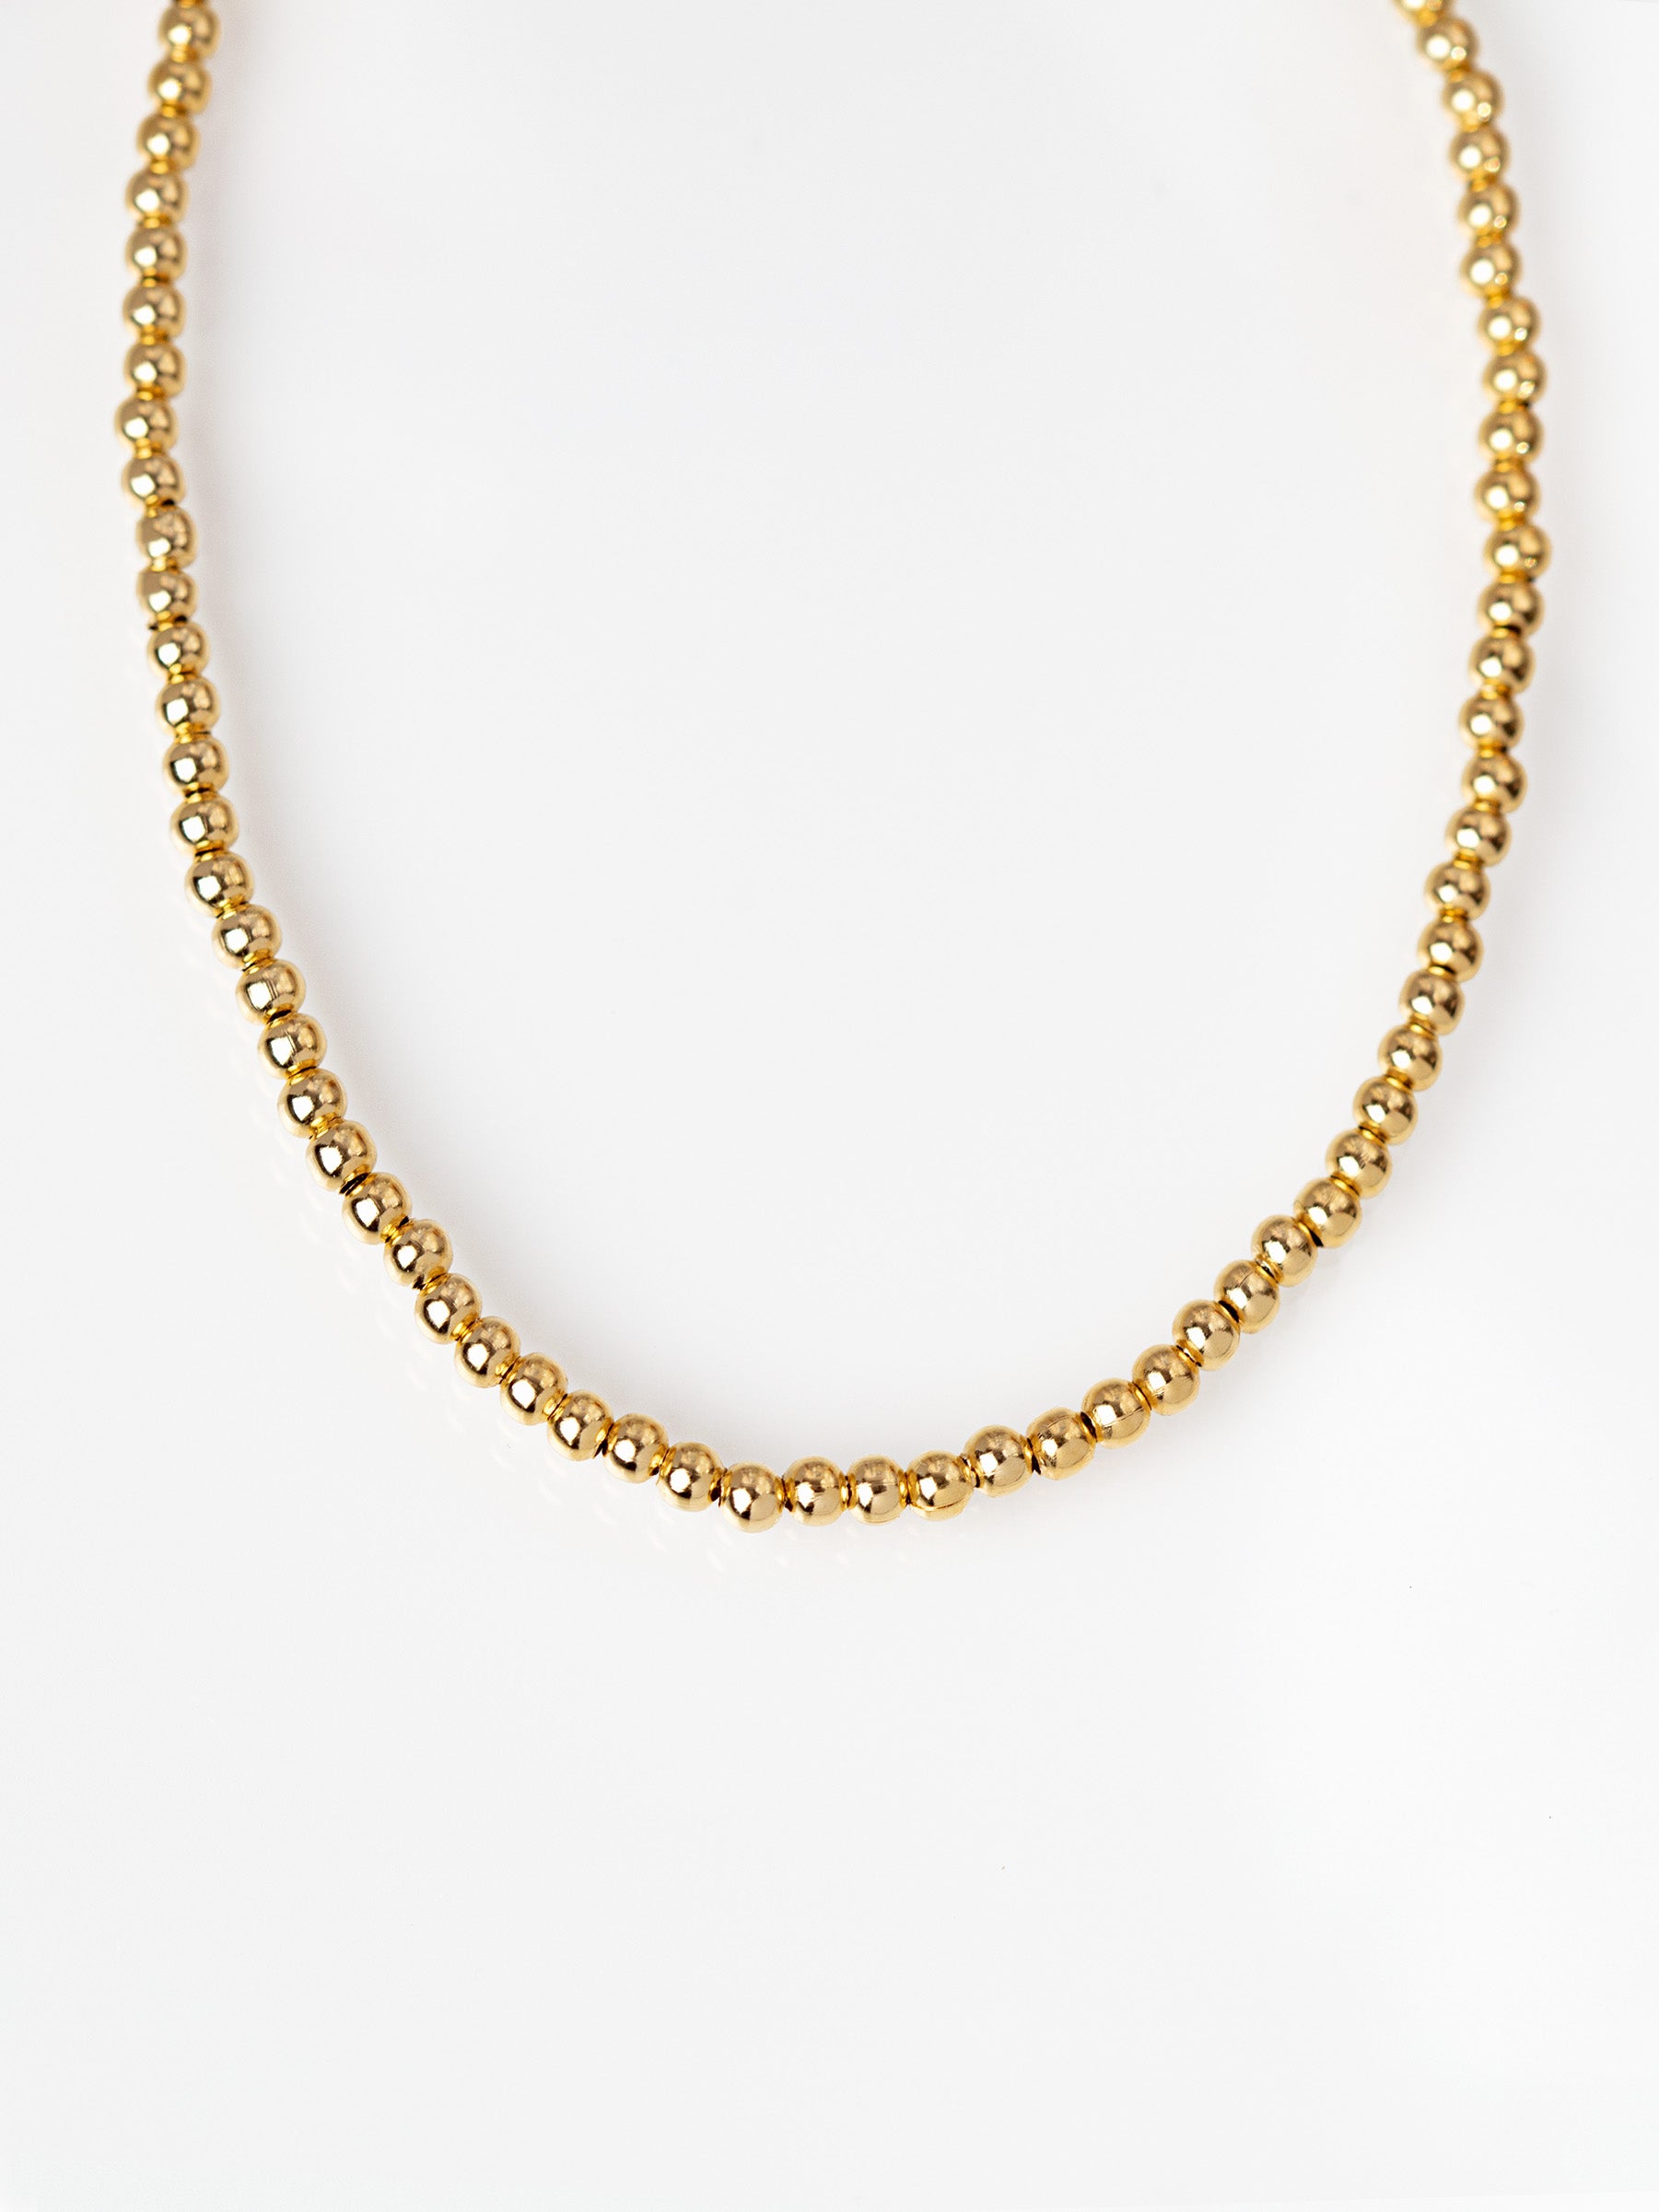 Gold Ball Choker or Necklace With Round Beads